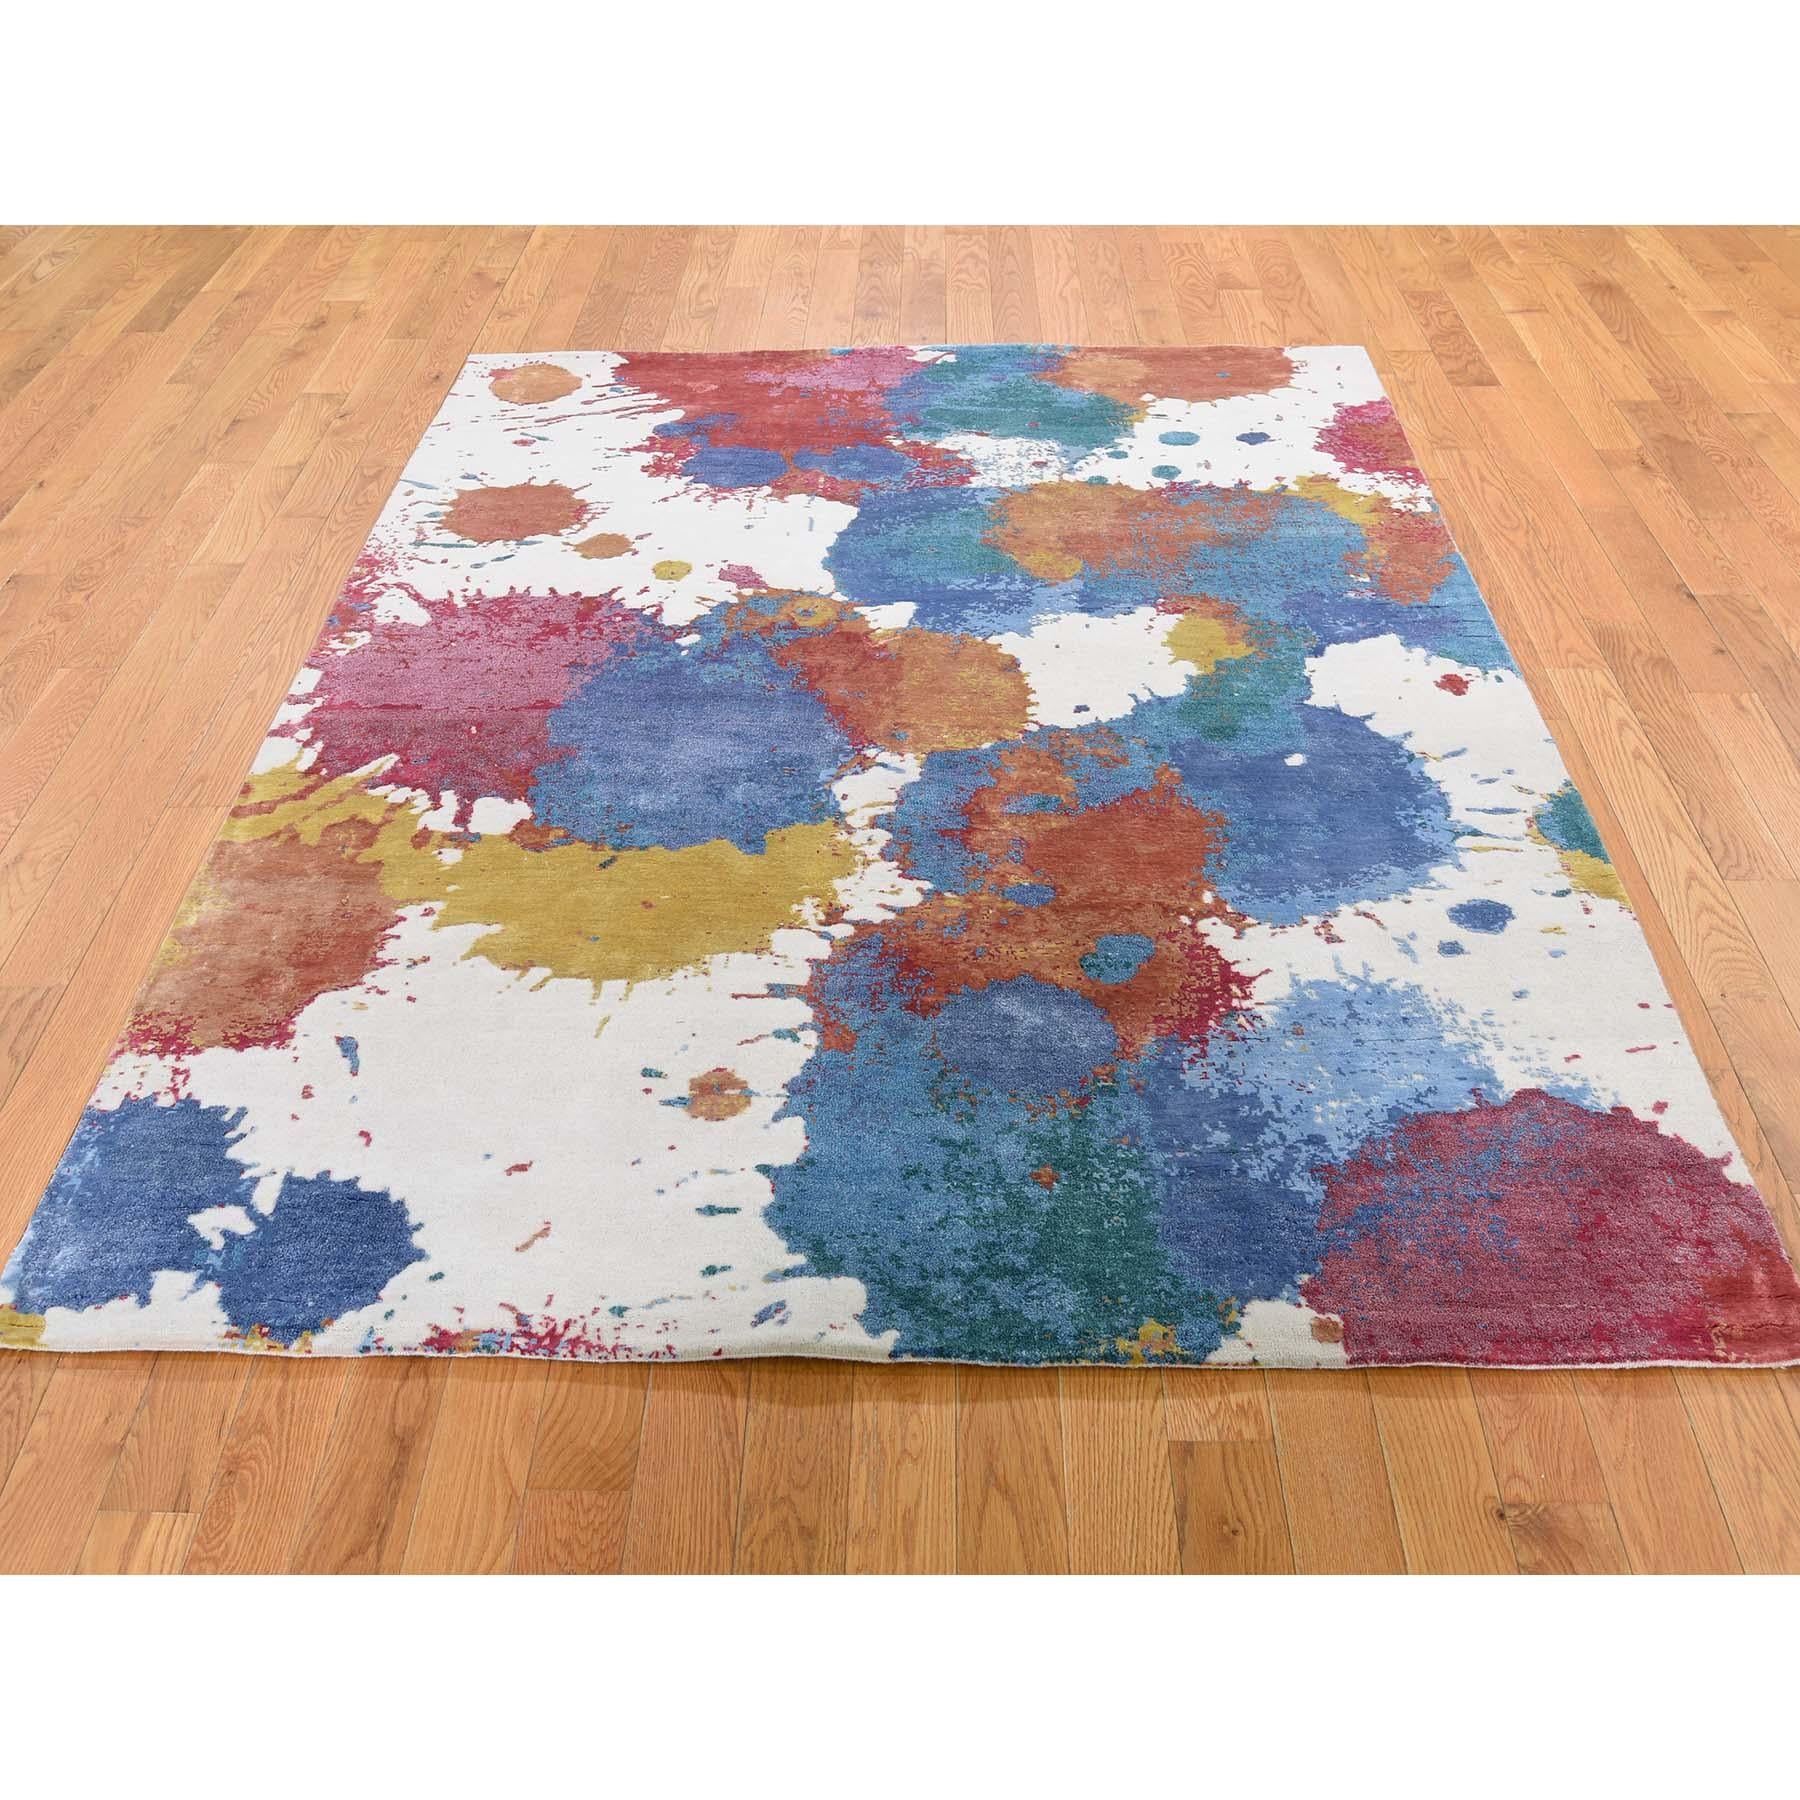 Other Modern Wool And Silk Splash Design Thick And Plush Hand-Knotted Rug, 5'1